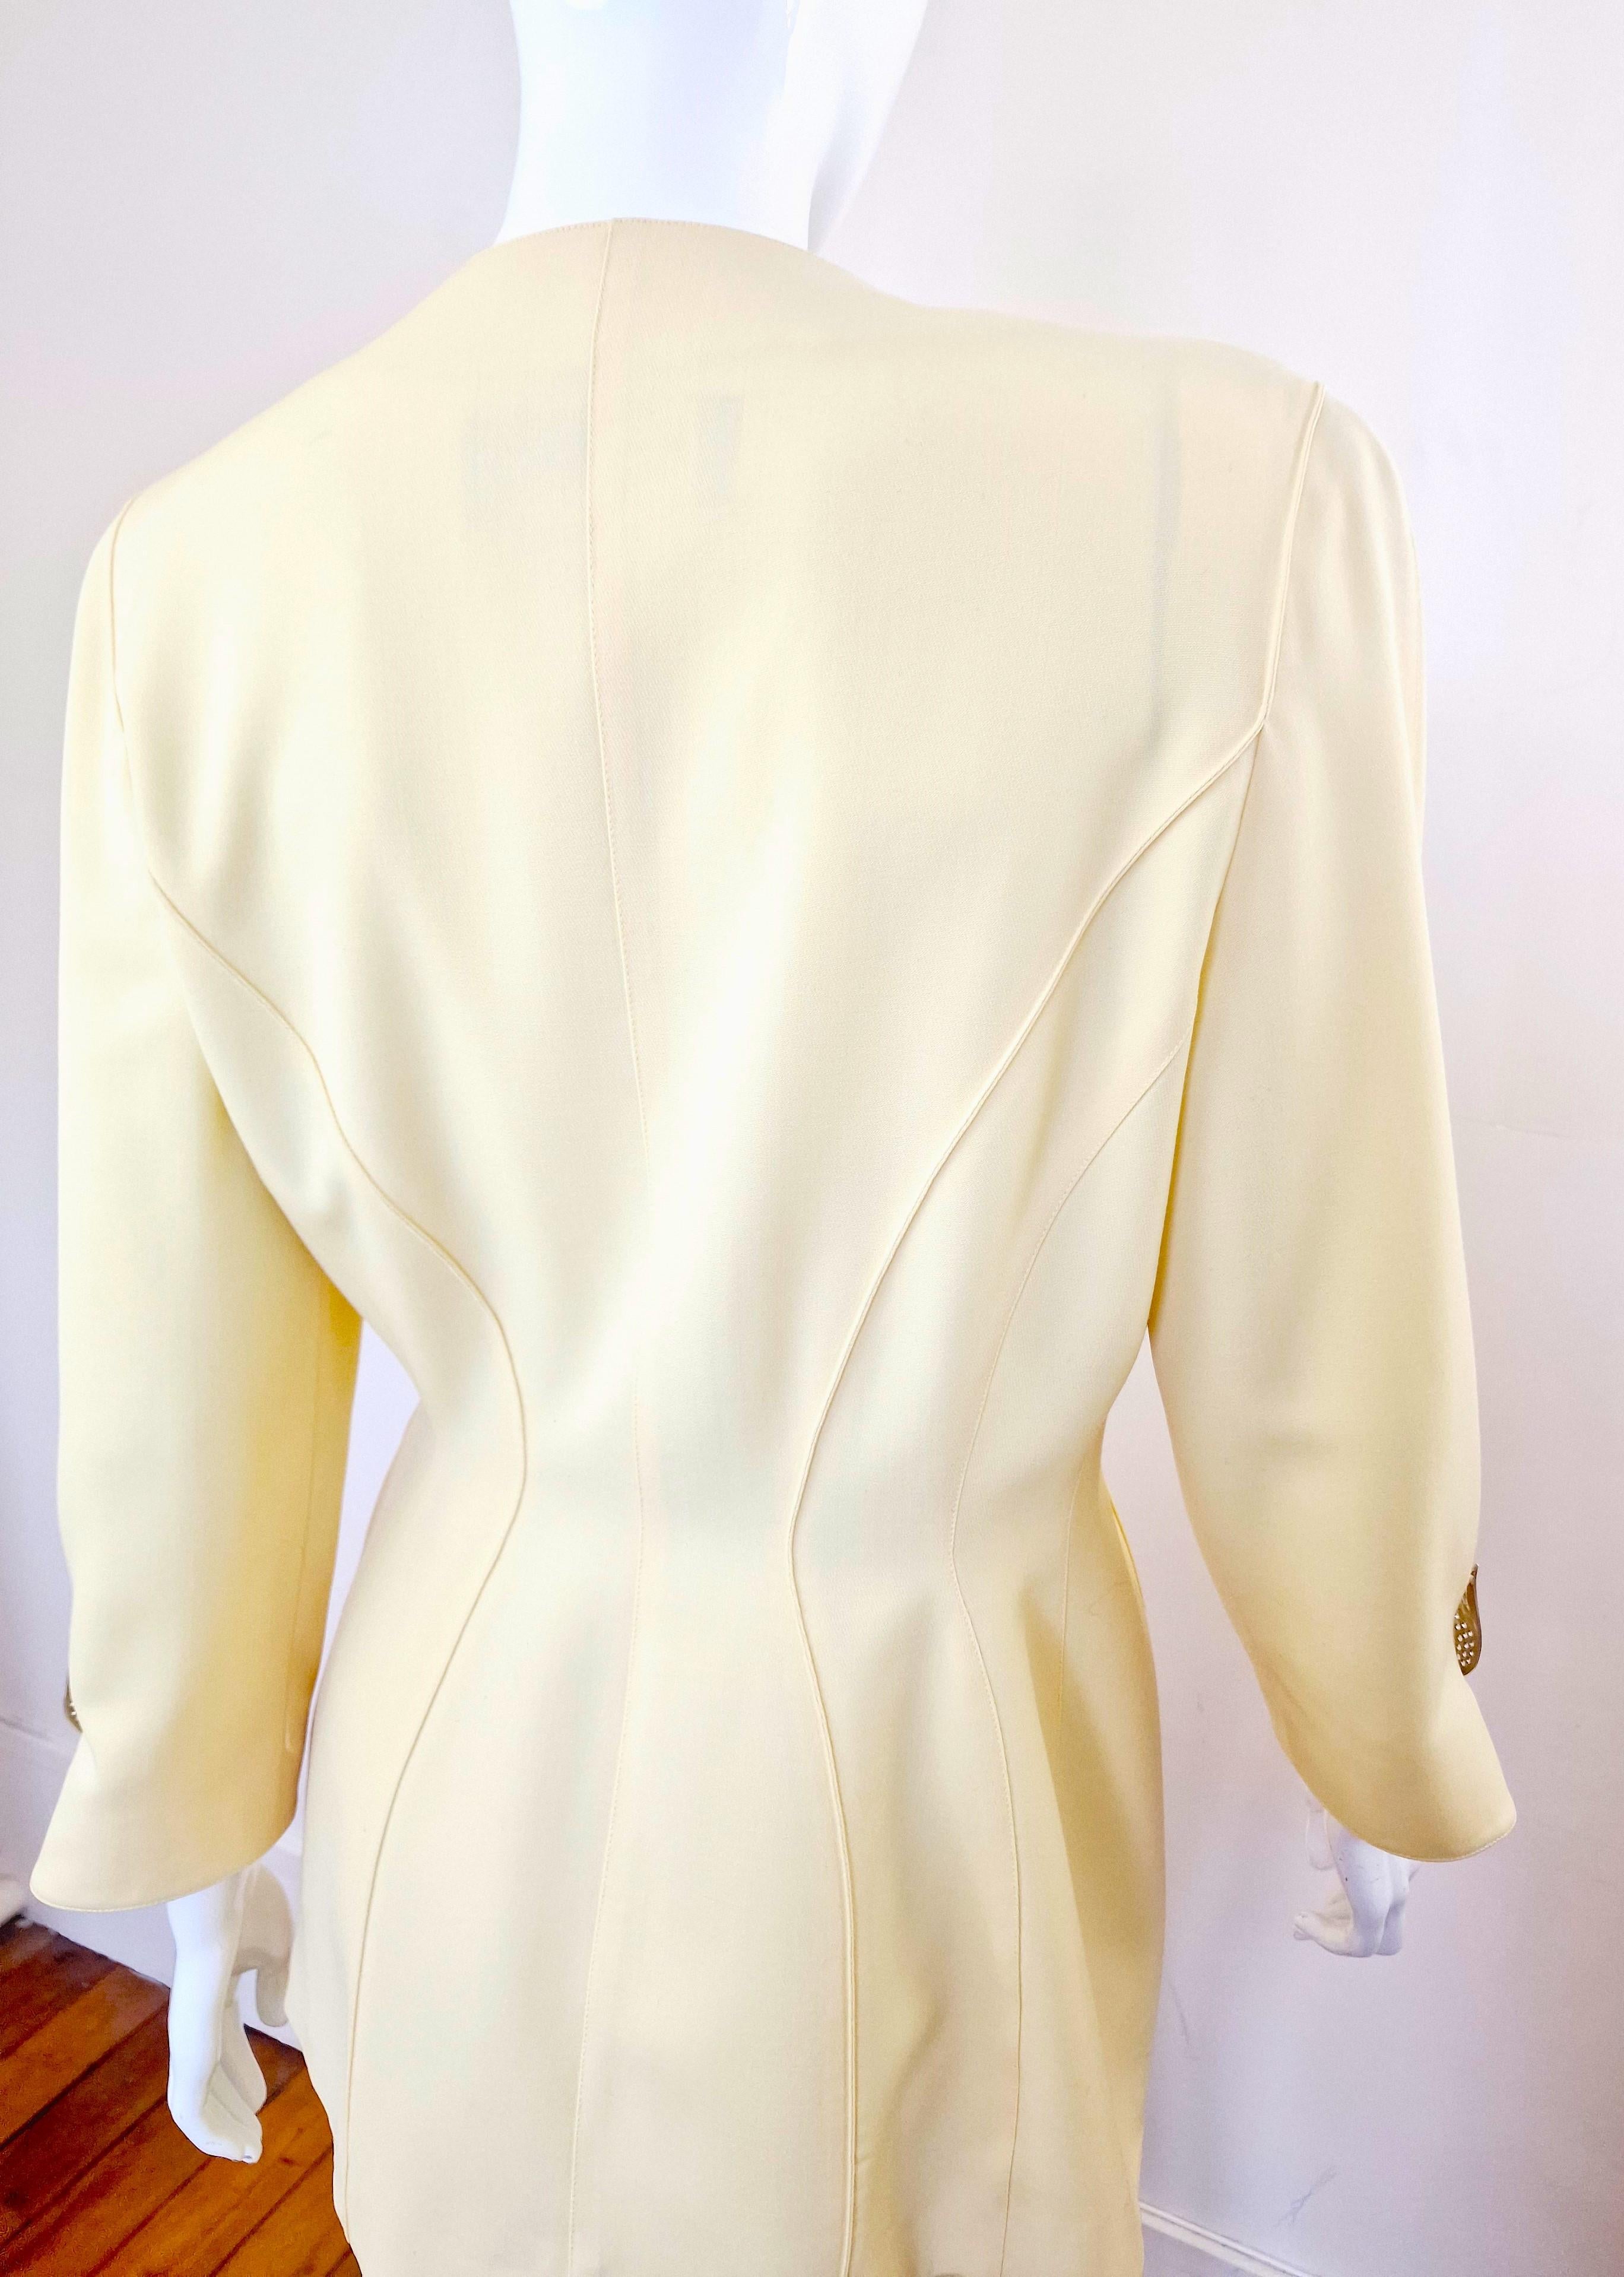  Thierry Mugler Yellow Metal Shiny Star Large Evening Vampir Couture Dress Suit  For Sale 2